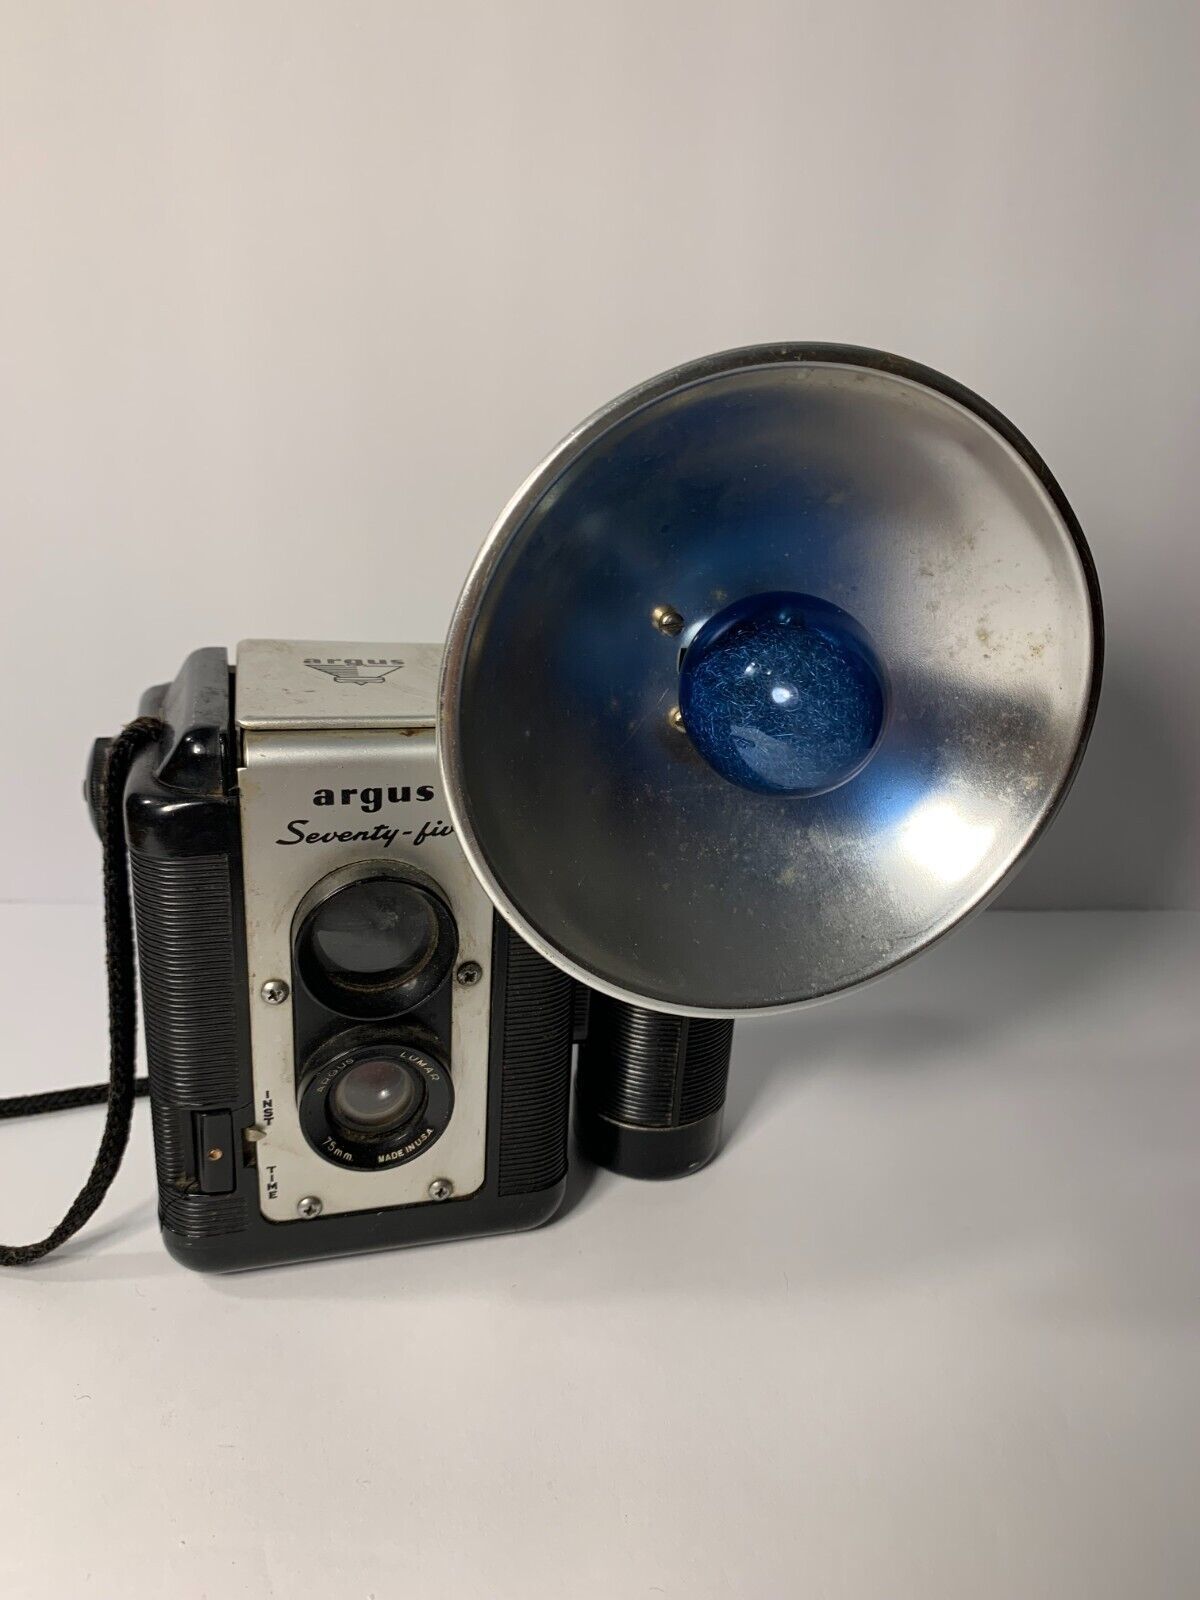 Vintage ARGUS Seventy-Five Camera with Flash and Bulb - $20.79